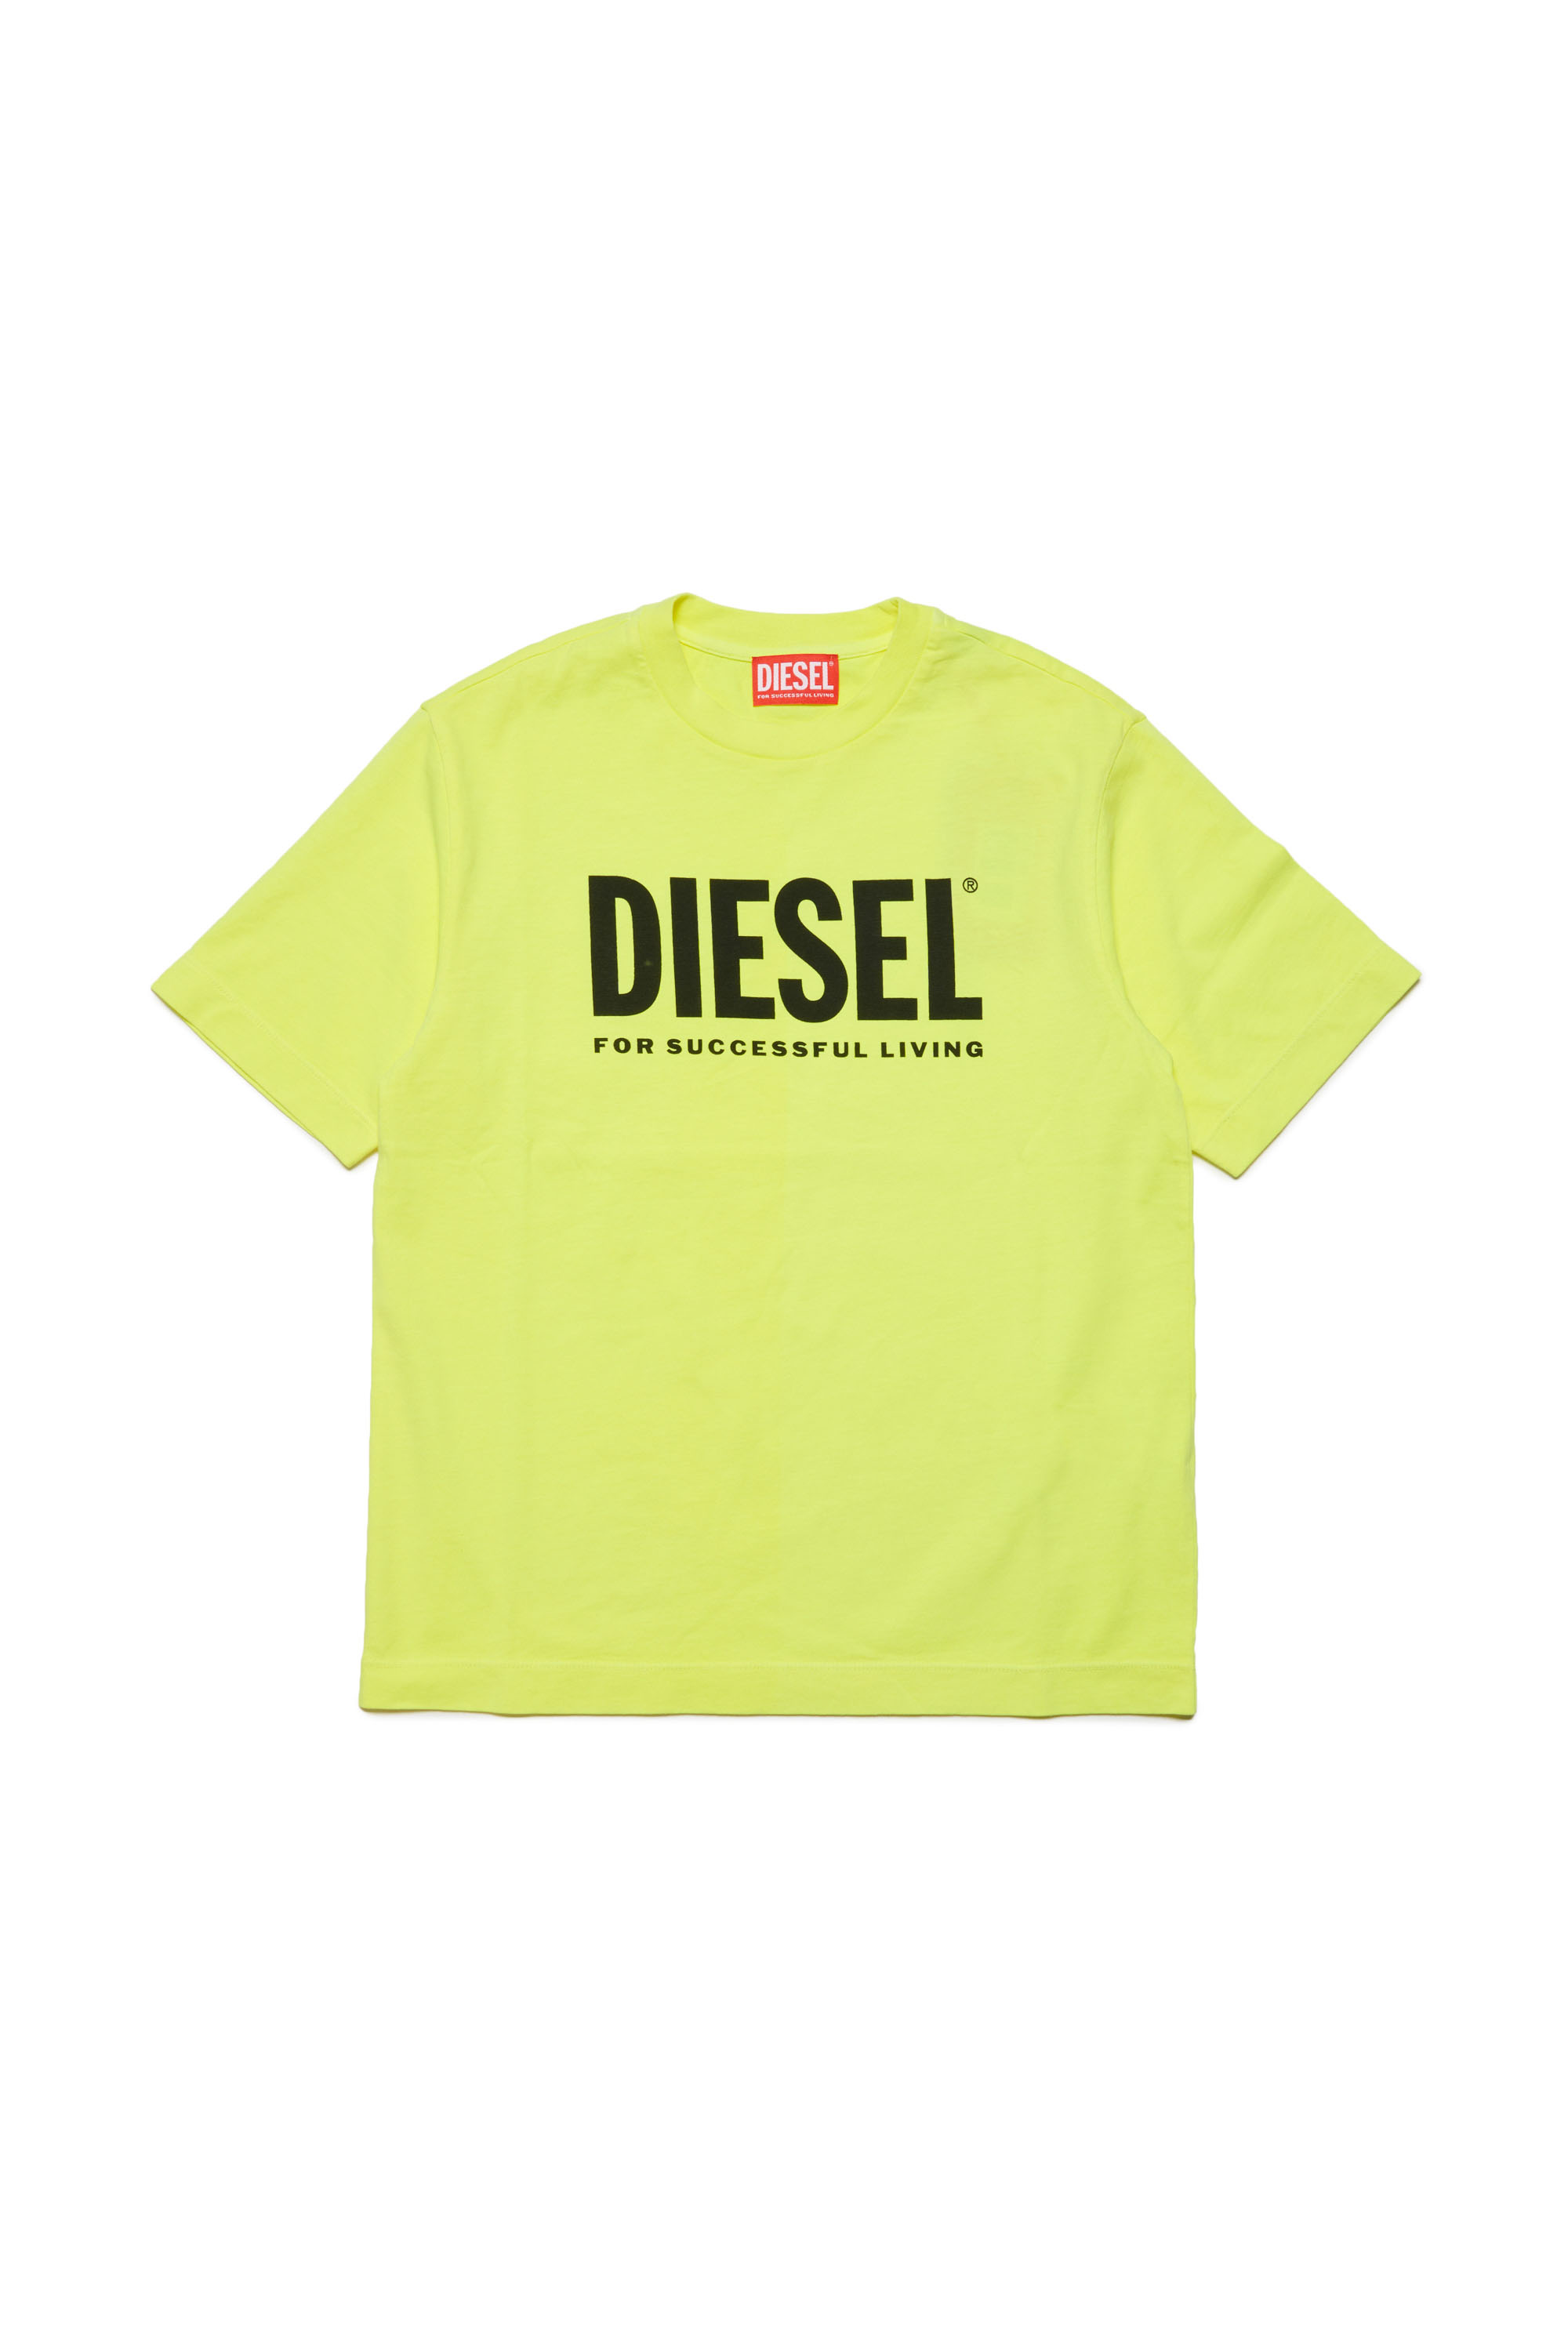 Diesel - TNUCI OVER, Unisex T-shirt with Diesel For Successful Living logo in Yellow - Image 1